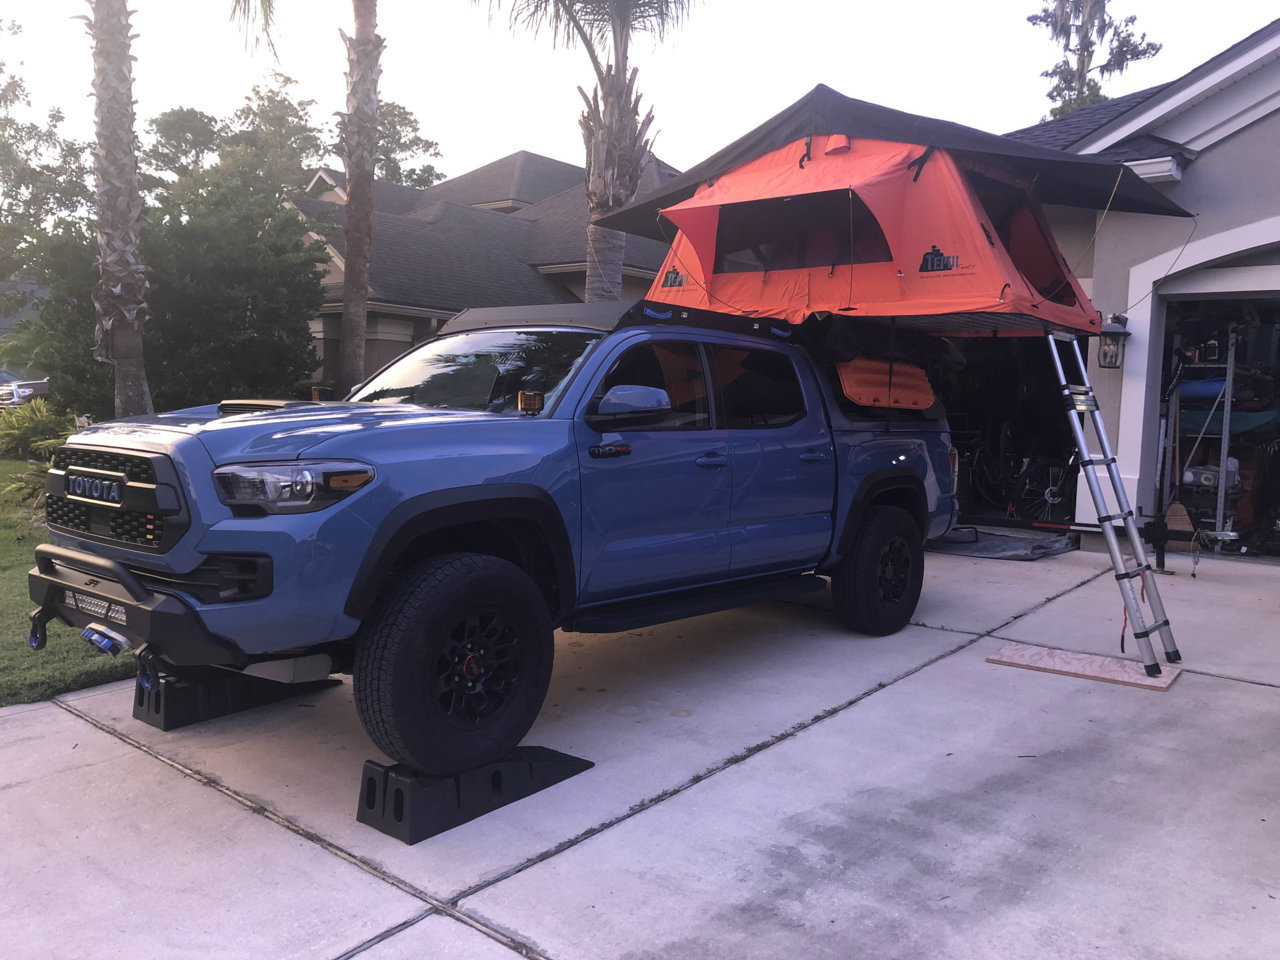 Truck with tent.jpg